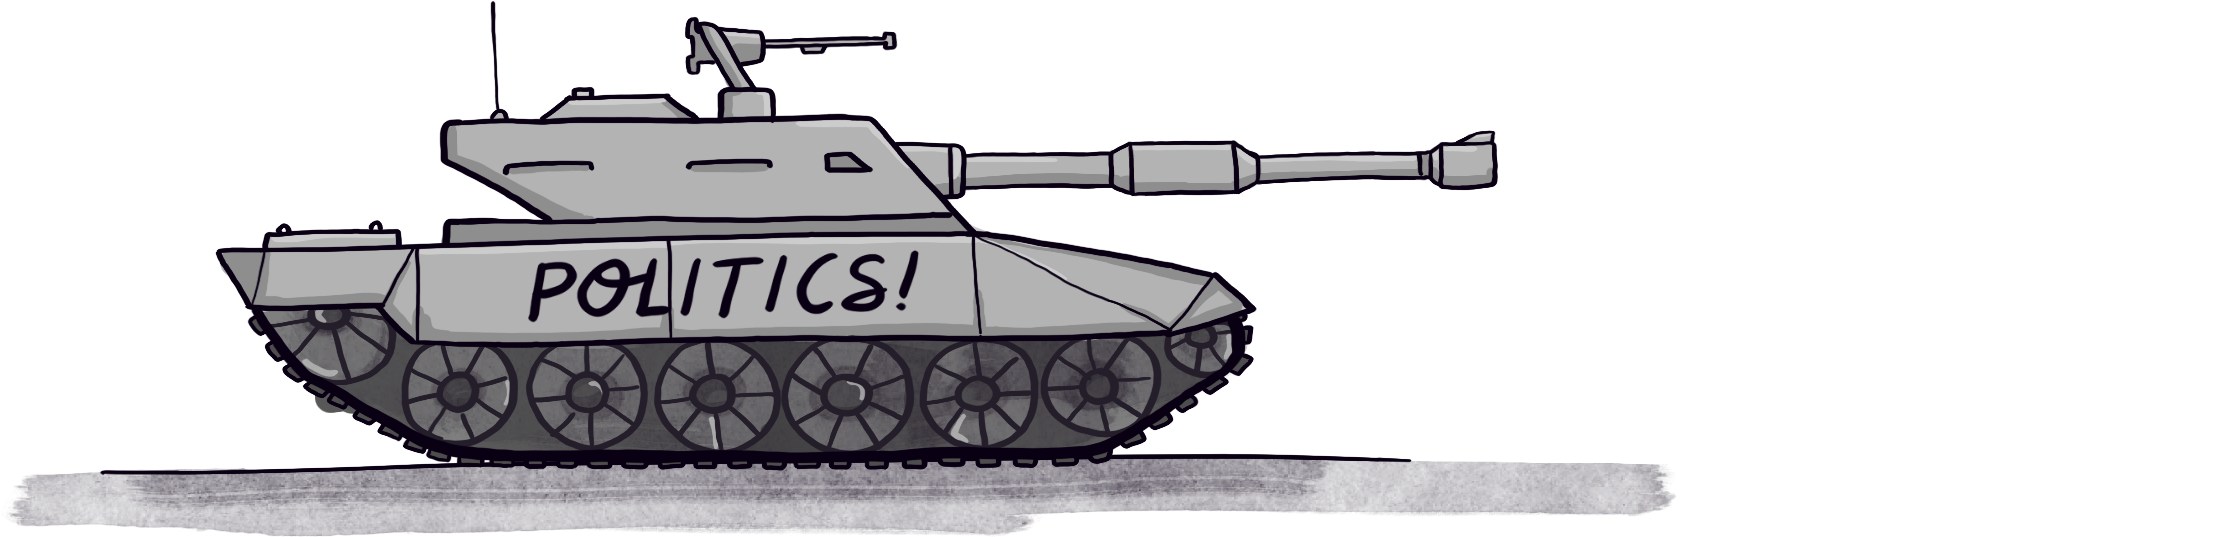 A military tank with the label 'POLITICS' written on the side.